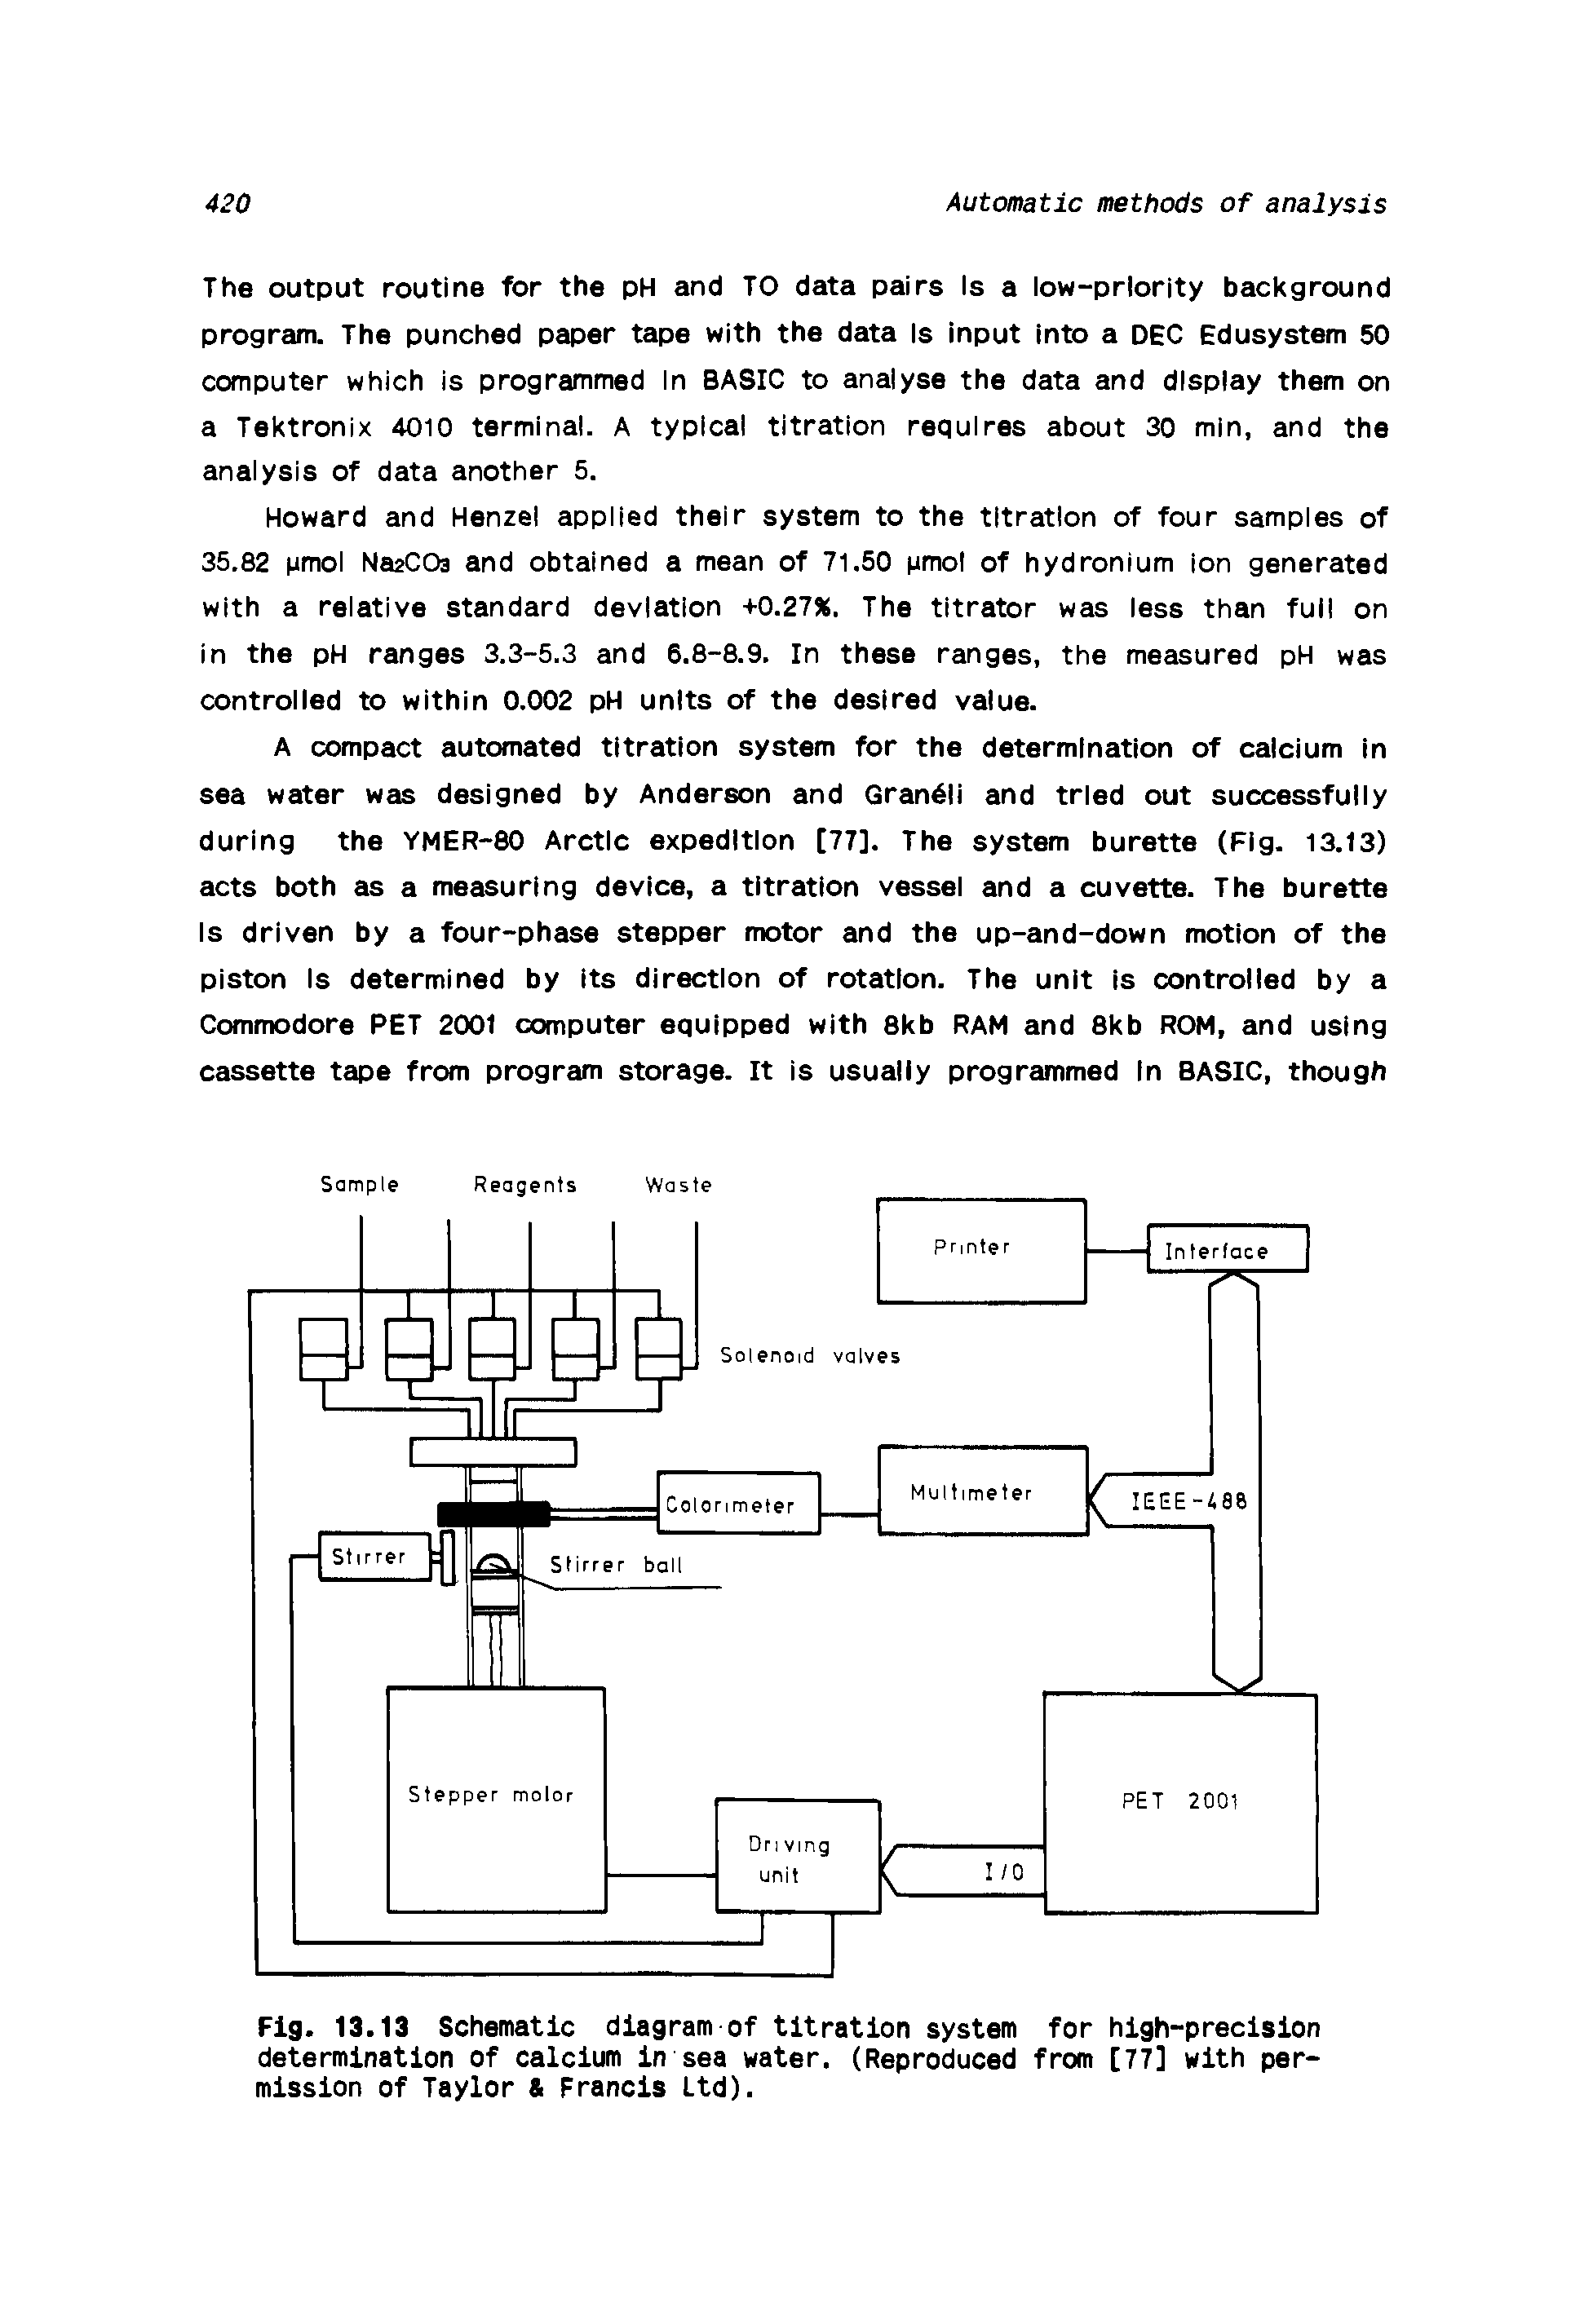 Fig. 13.13 Schematic diagram of titration system for high-precision determination of calcium in sea water. (Reproduced from [77] with permission of Taylor Francis Ltd).